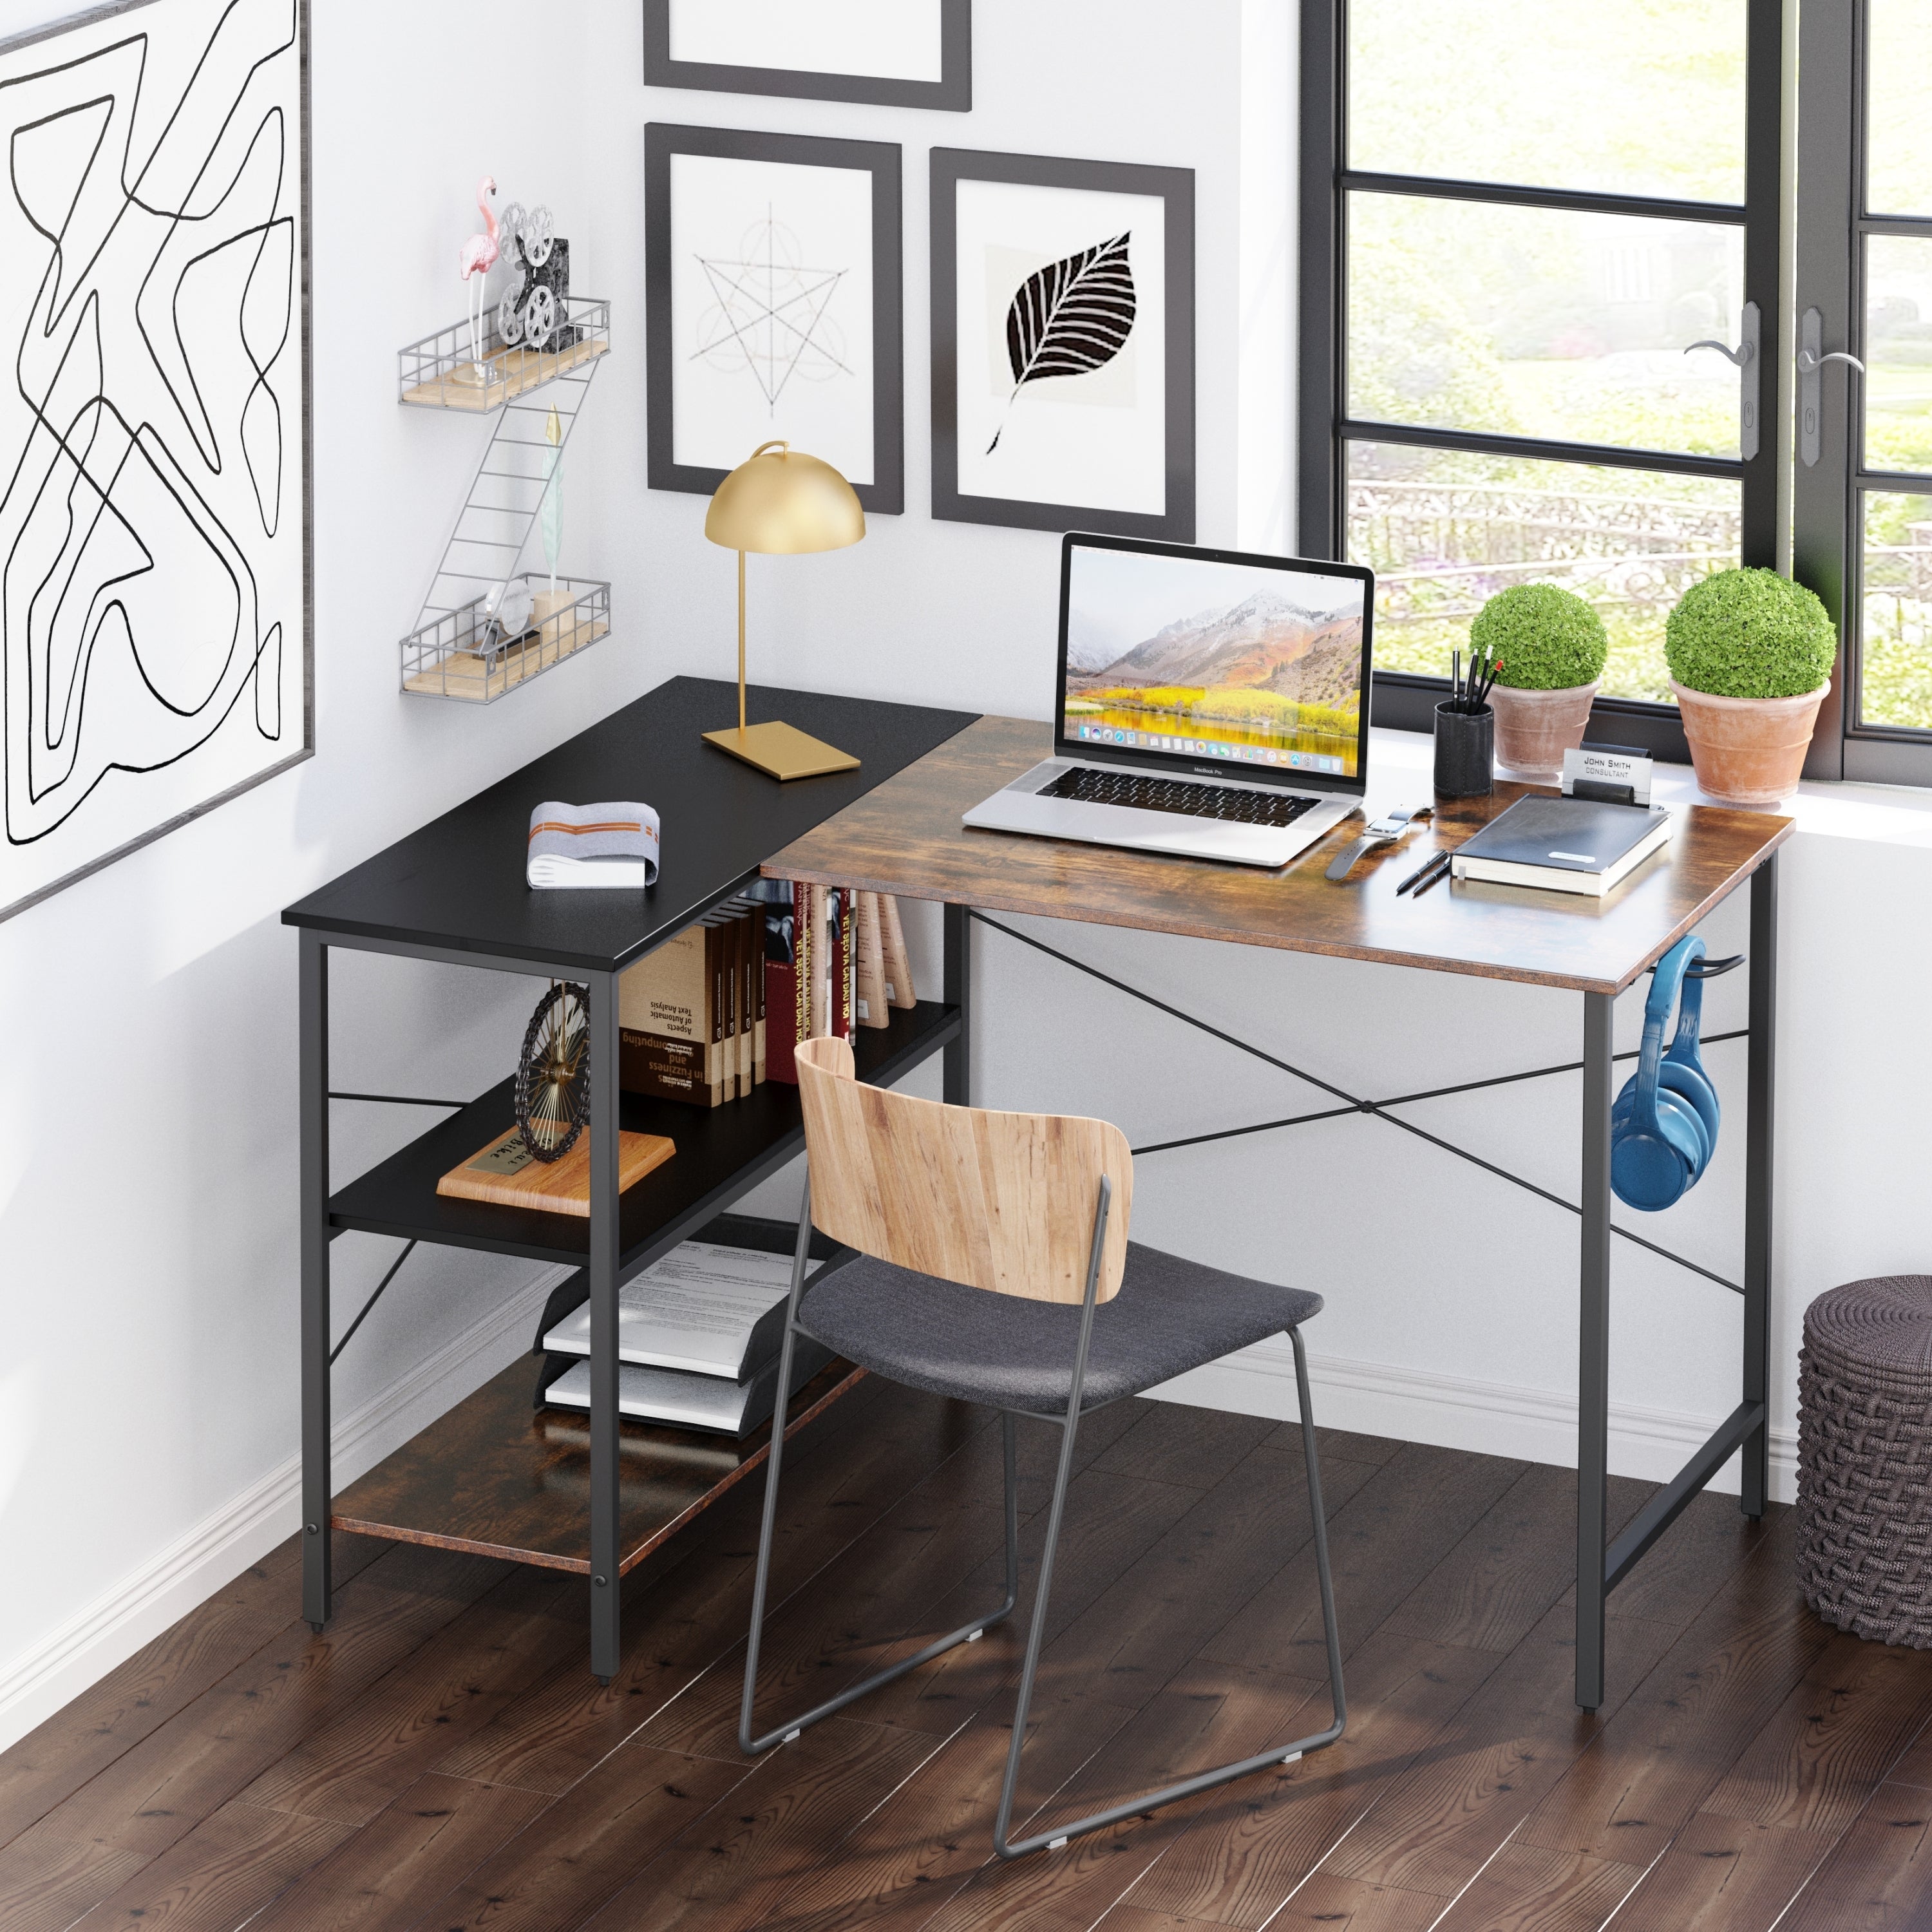 (West America Express shipping warehouse，two days to deliver goods)L-shaped black linen + retro double color matching desk